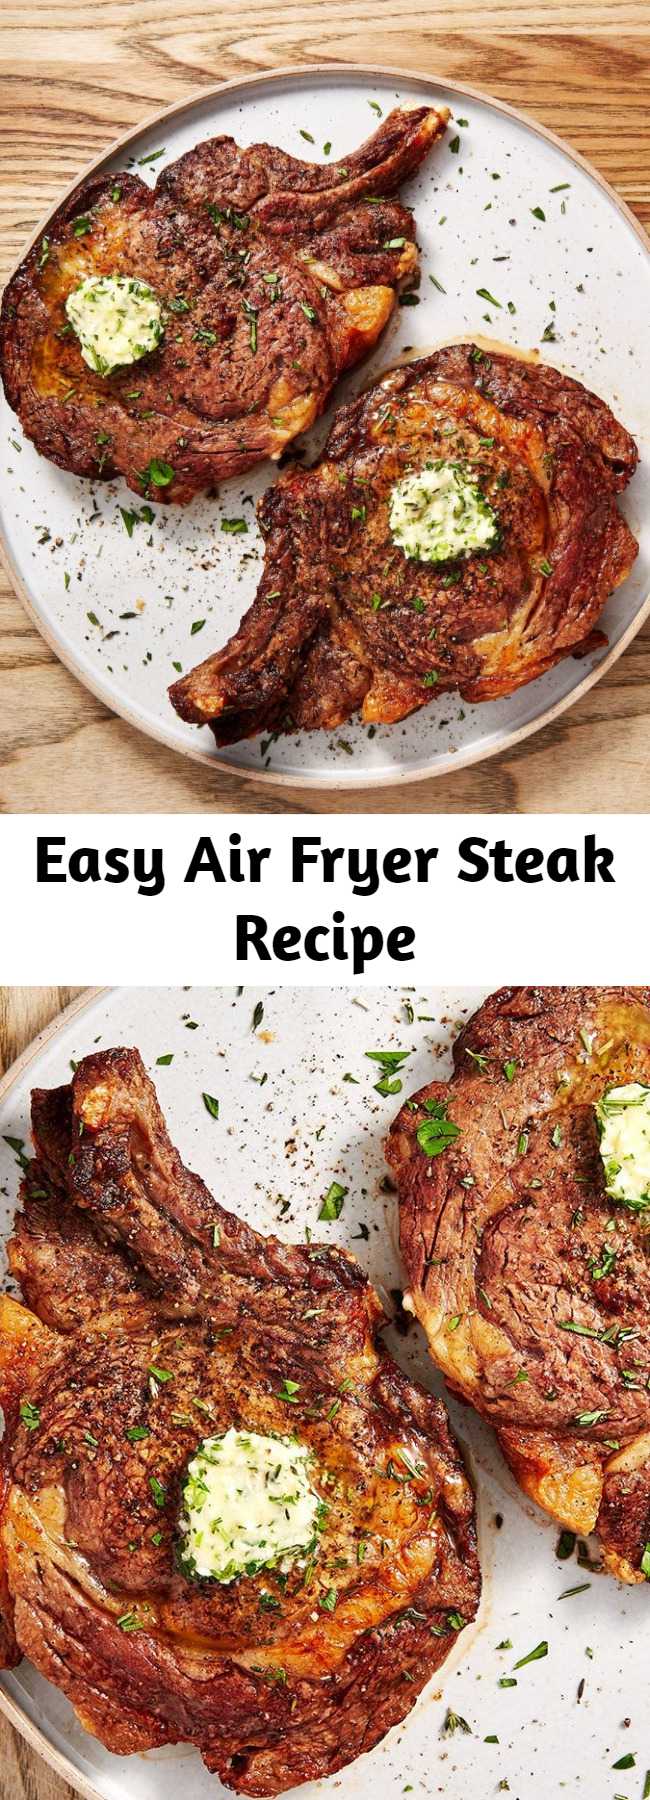 Easy Air Fryer Steak Recipe - A perfectly seared steak can seem like a daunting task. Getting the golden, crusty sear on the outside and trying not to overcook your steak can be difficult. What if we told you that your air fryer can take all of that stress away? It's true! Leave it to the air fryer to cook a perfect piece of steak all without filling your kitchen with smoke or turning on the grill. As for the herb butter? It's not mandatory, but it sure is delicious.